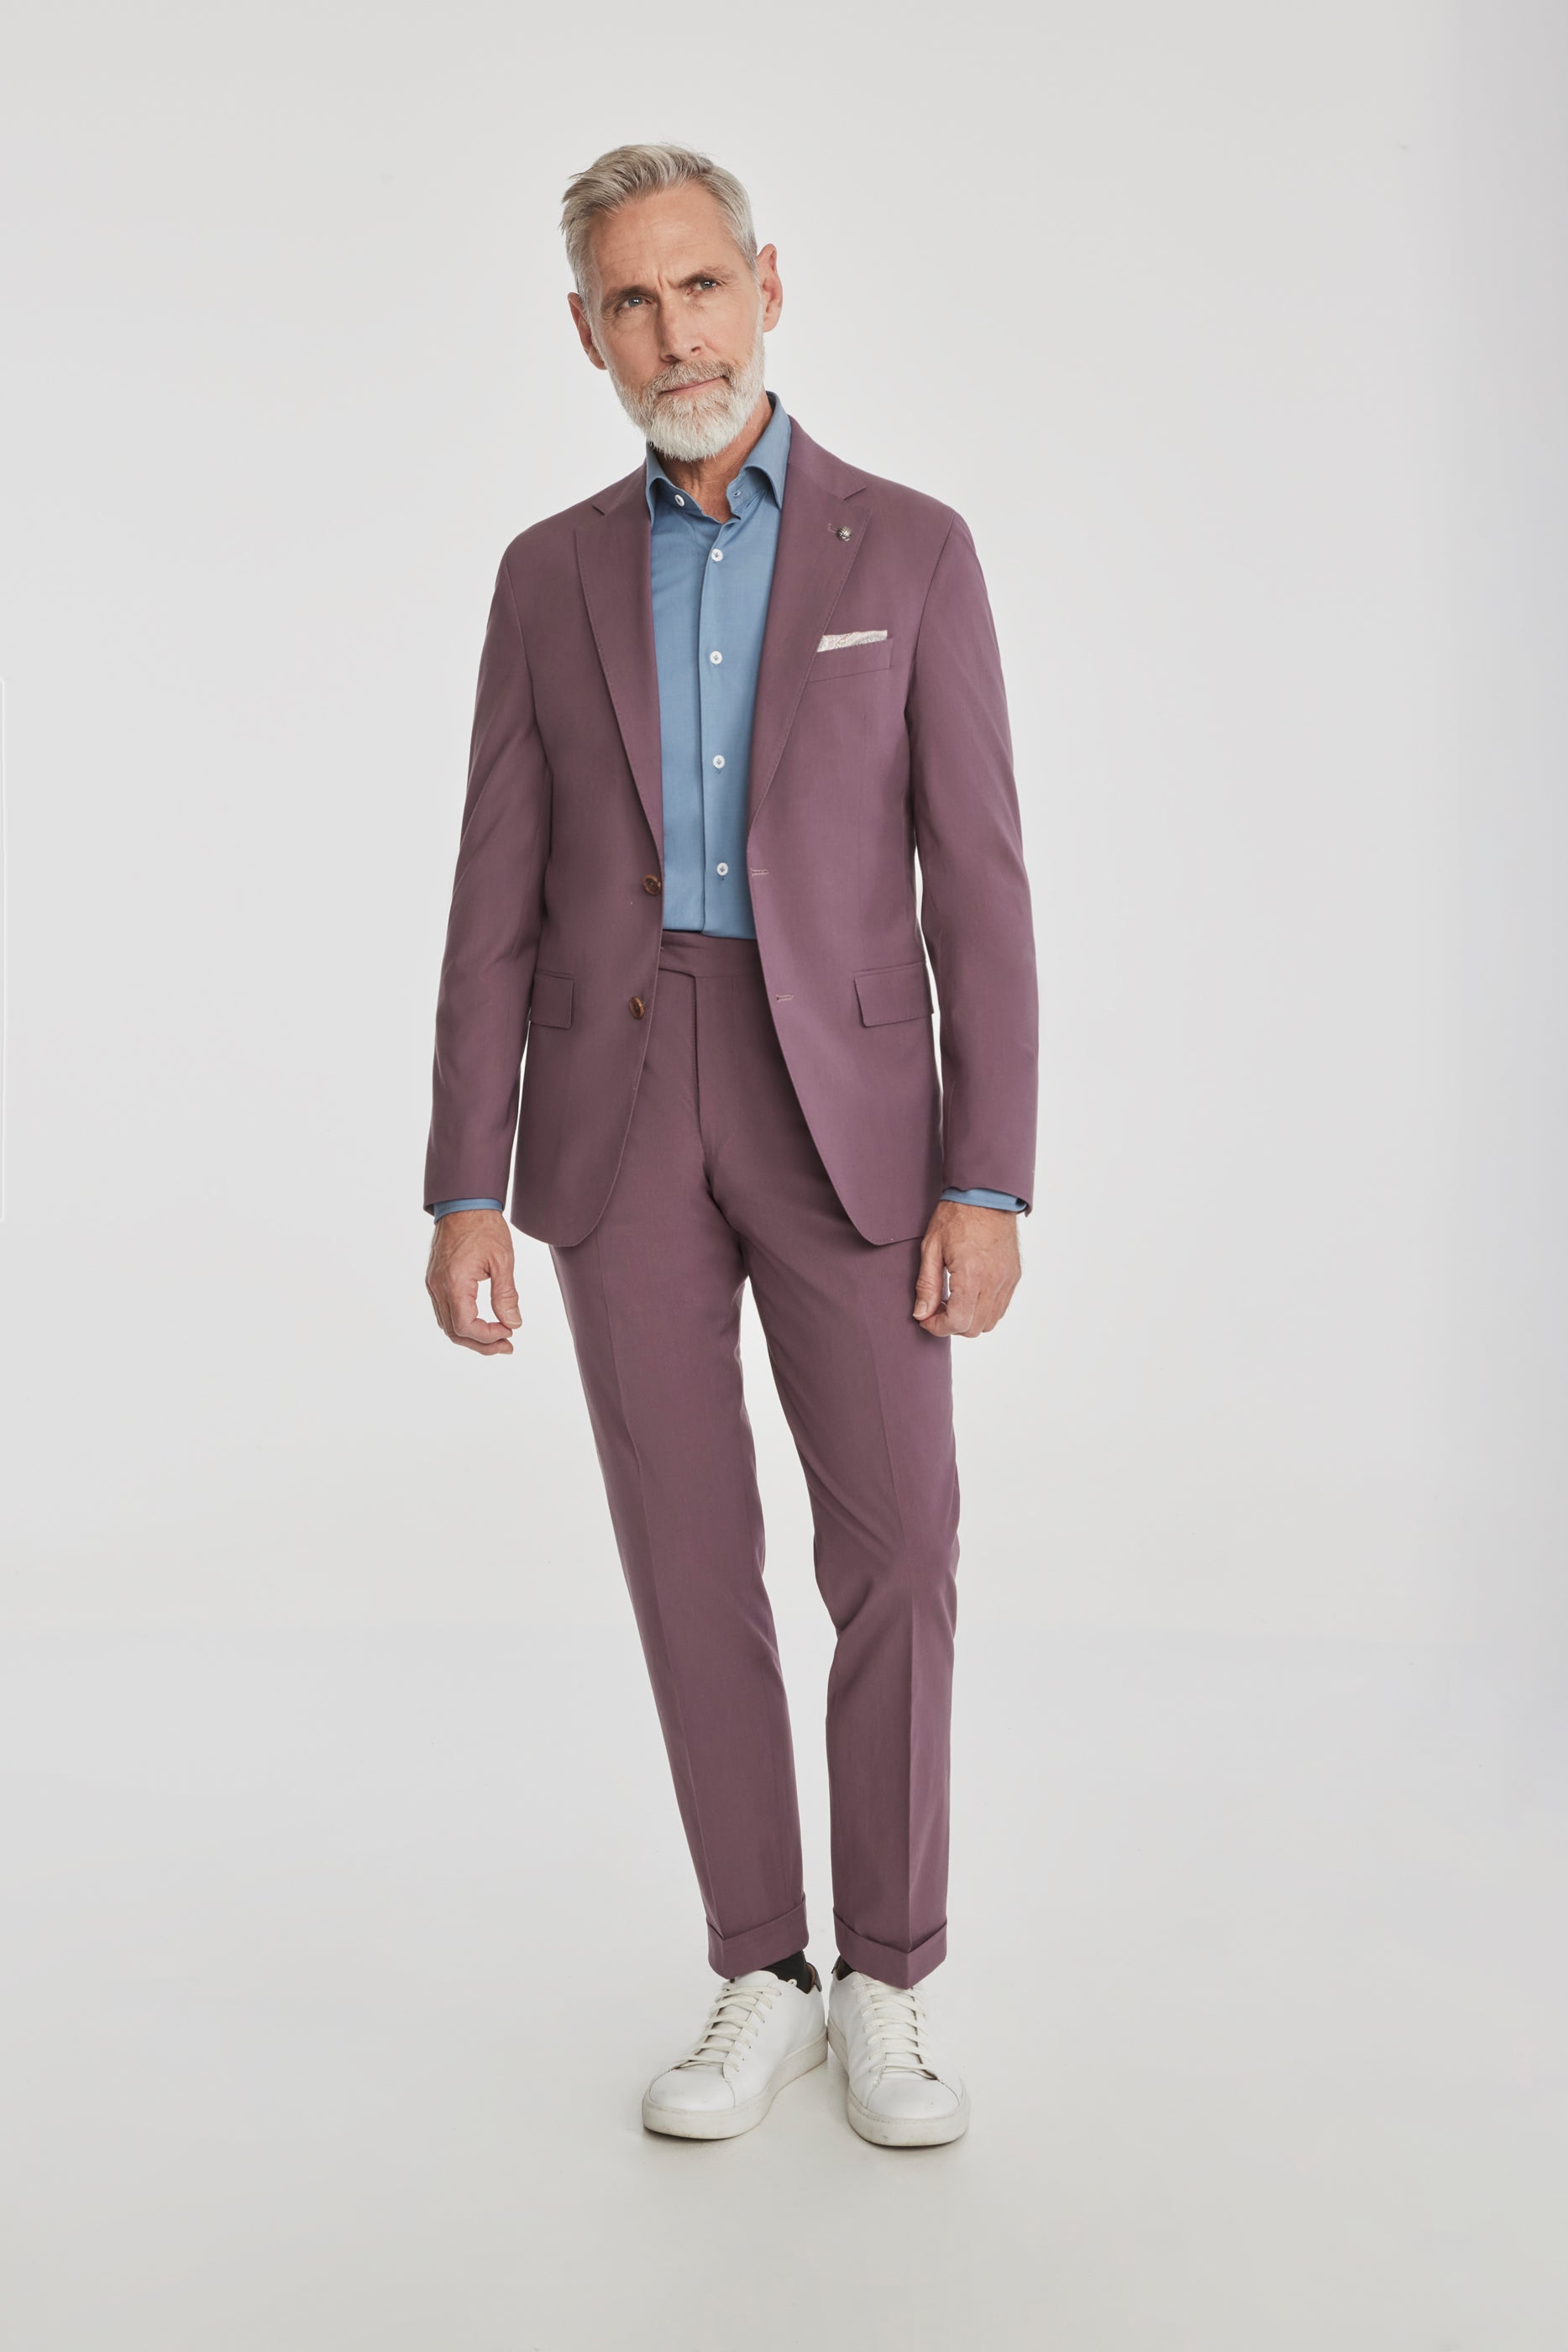 Alt view Midland Solid Wool Cotton Stretch Suit in Berry